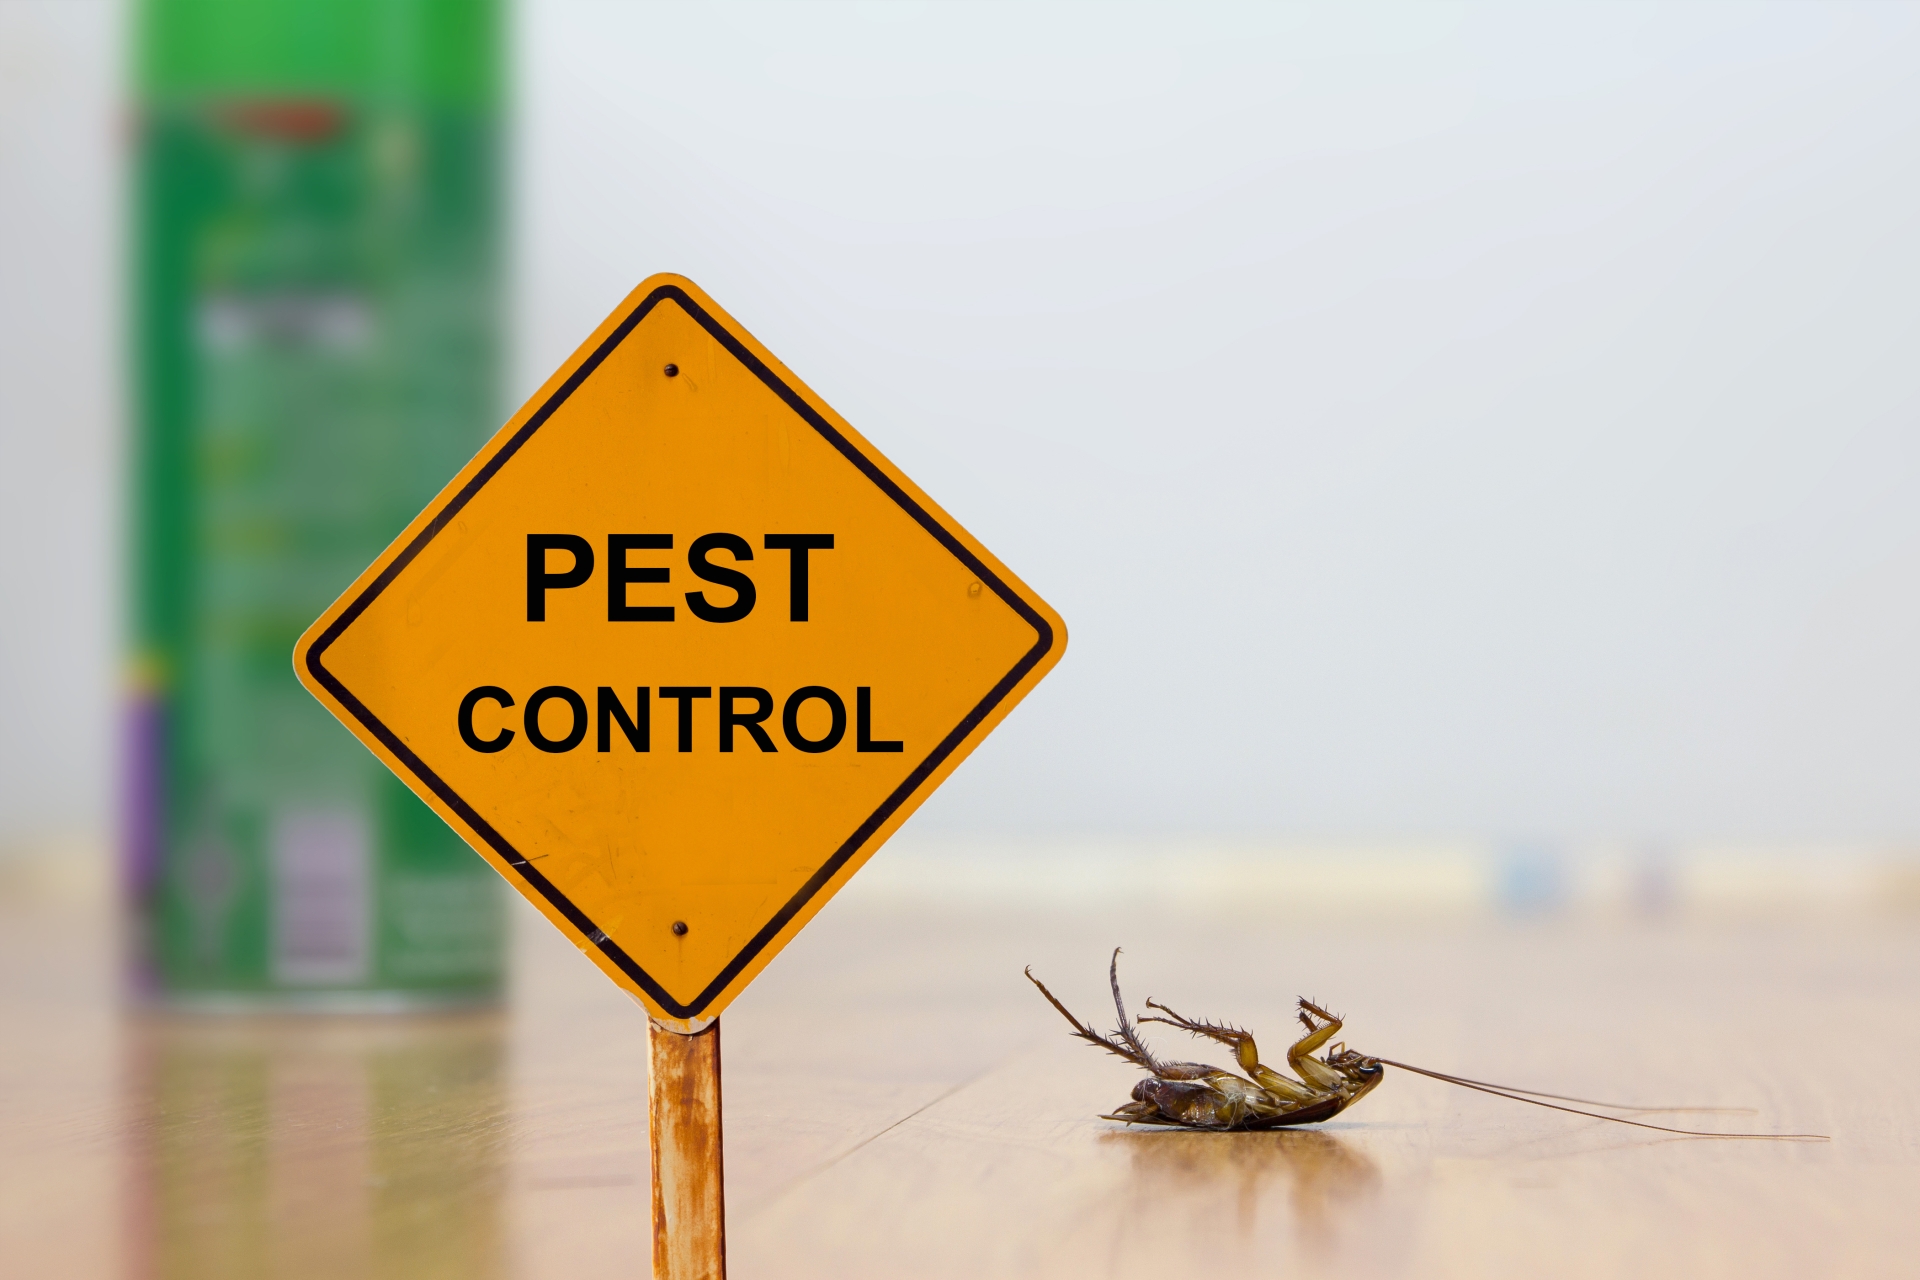 24 Hour Pest Control, Pest Control in Hampstead, NW3 . Call Now 020 8166 9746